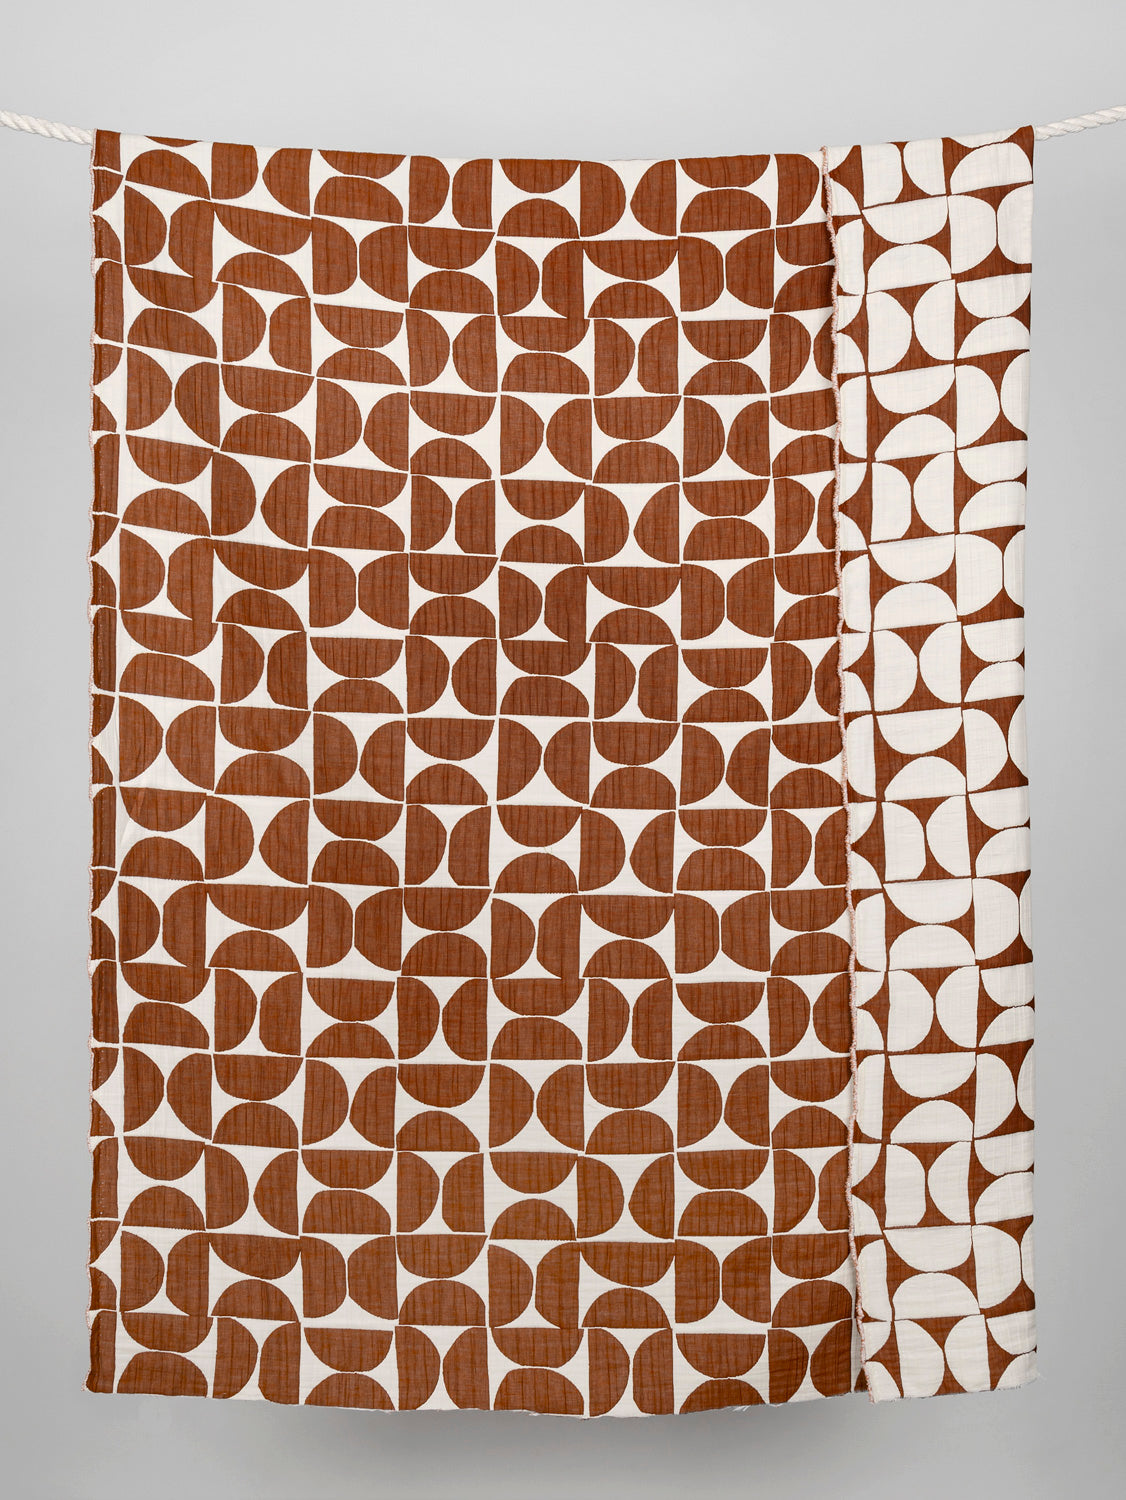 Double Sided Half Circle Quilted Cotton Jacquard with Batting - Rust + Cream | Core Fabrics